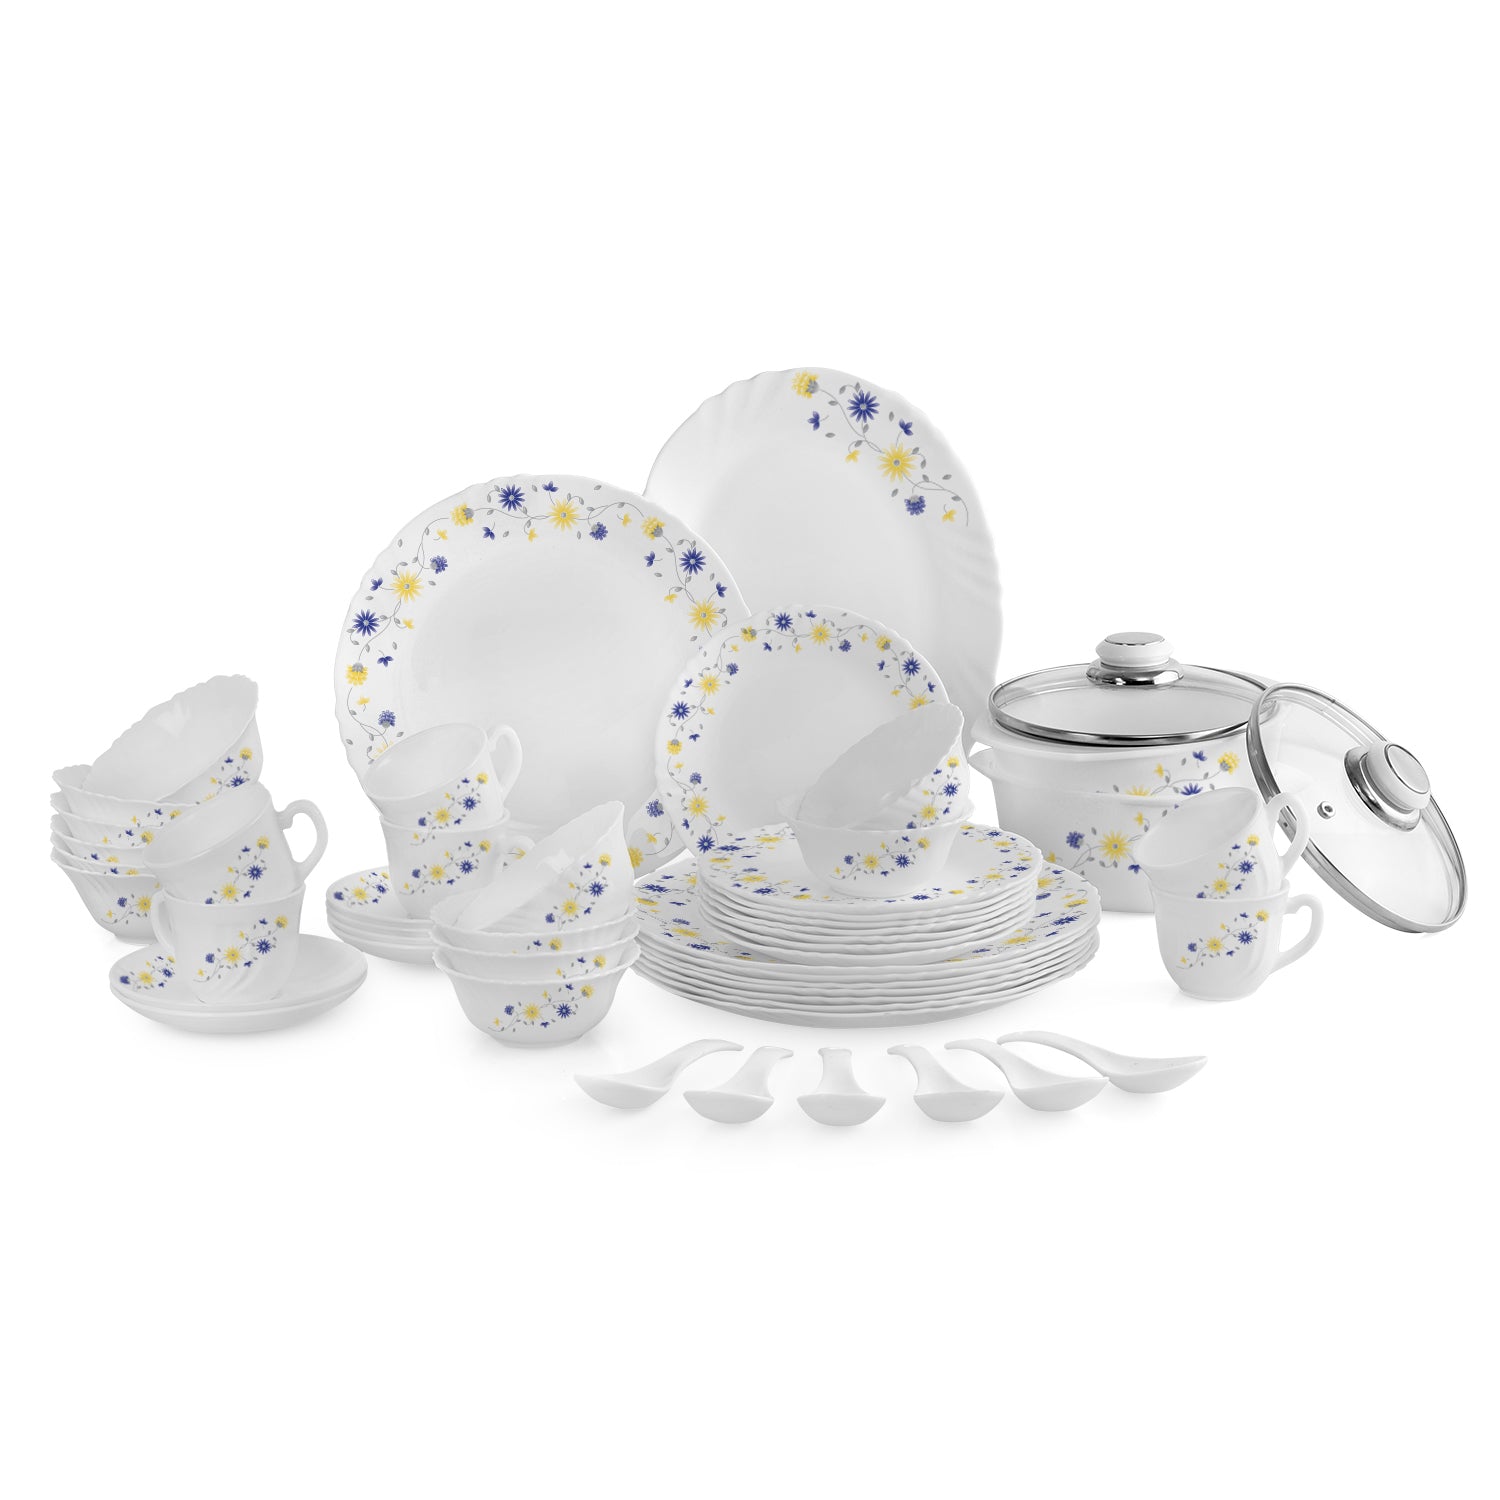 Imperial Series 45 Pieces Opalware Dinner Set for Family of 8 Bloming Daisy